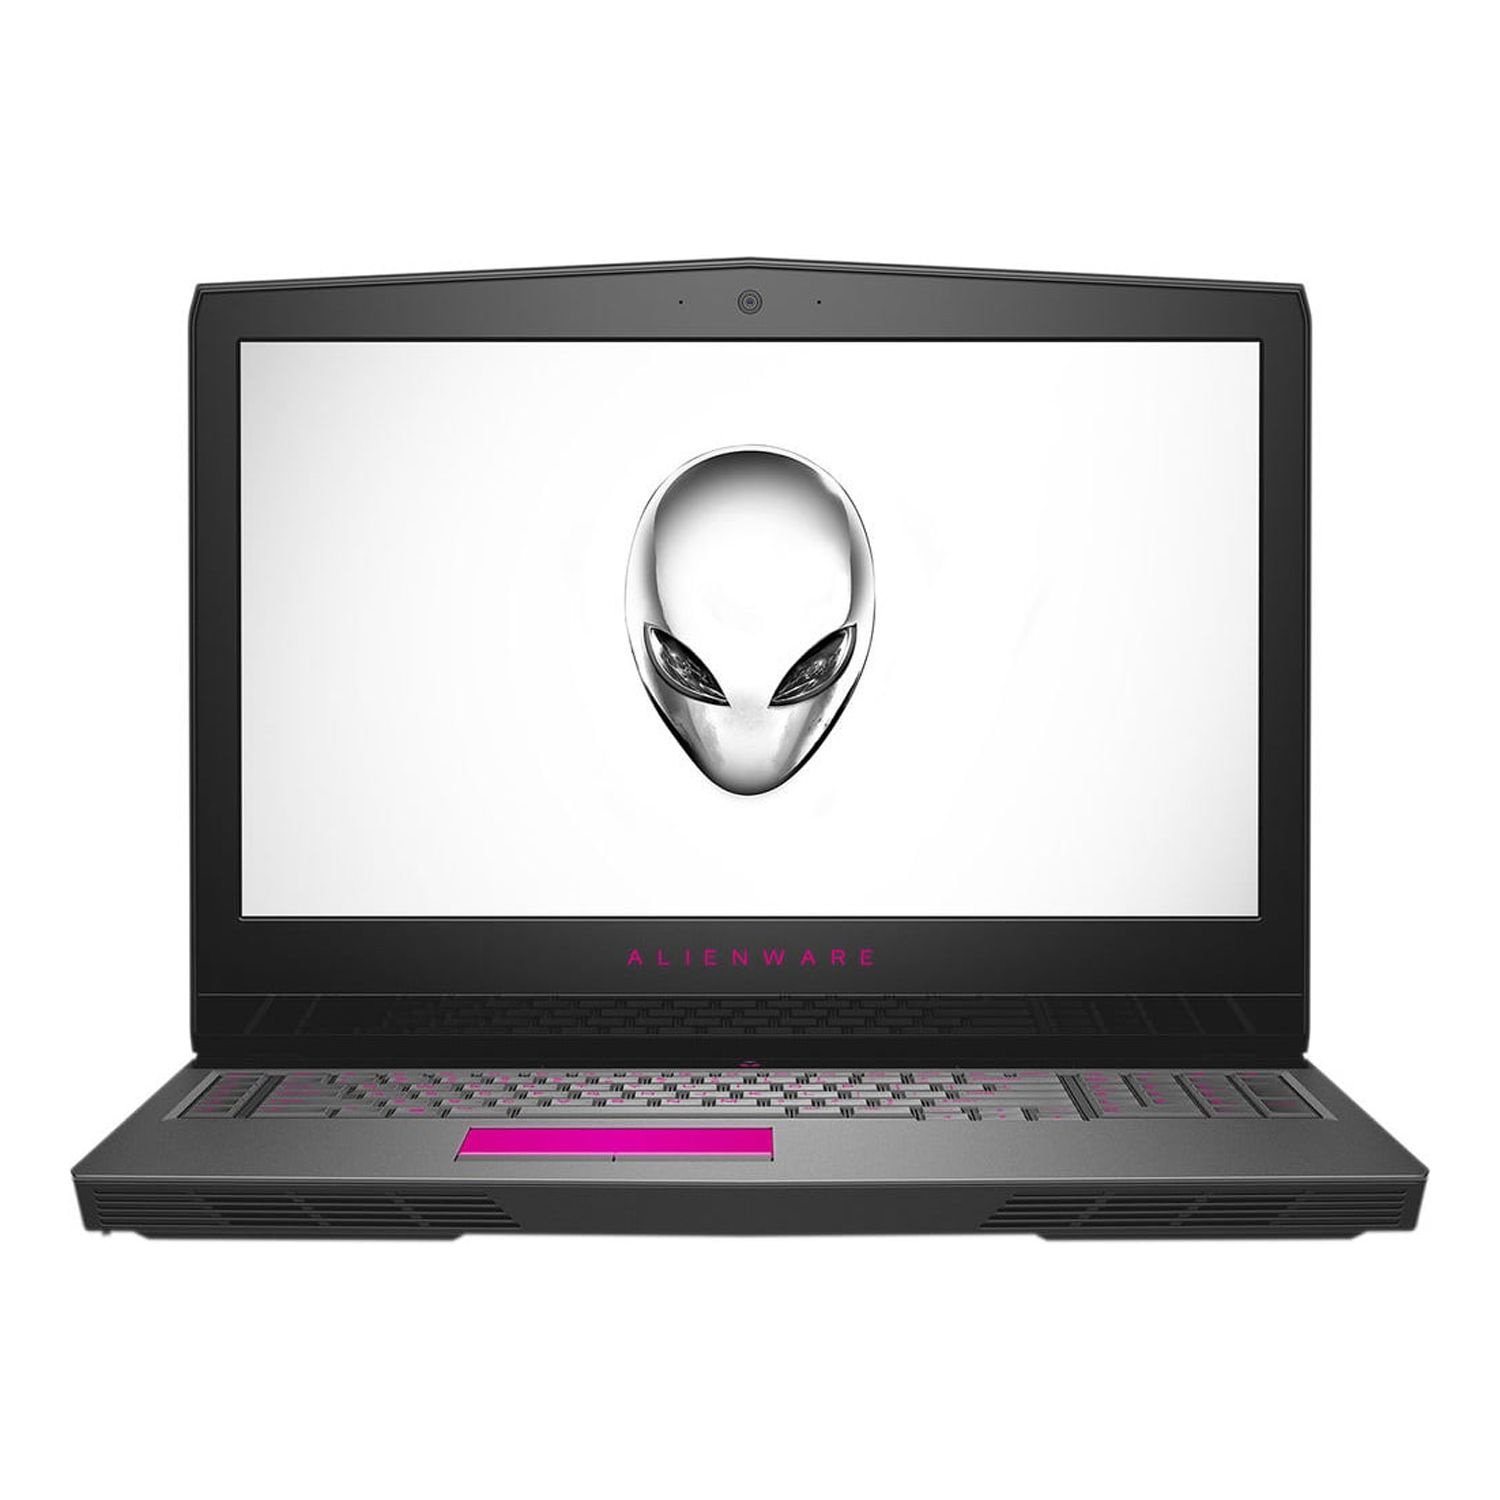 Alienware 17 R4 17.3" Notebook with Intel i7-7700HQ, 8GB 256GB SSD - image 1 of 12